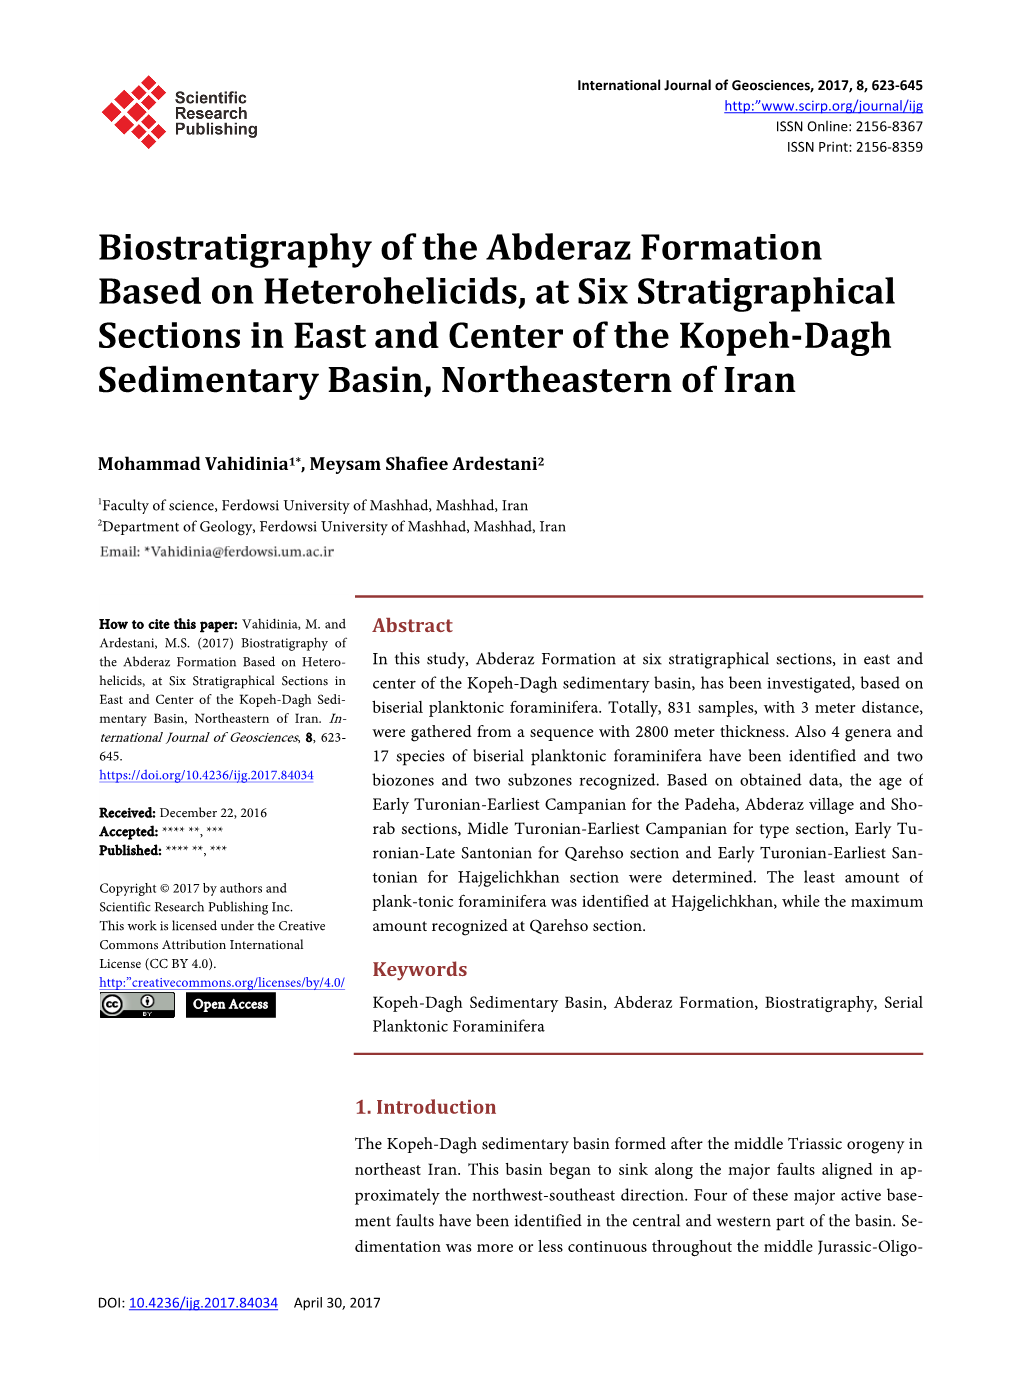 Biostratigraphy of the Abderaz Formation Based on Heterohelicids